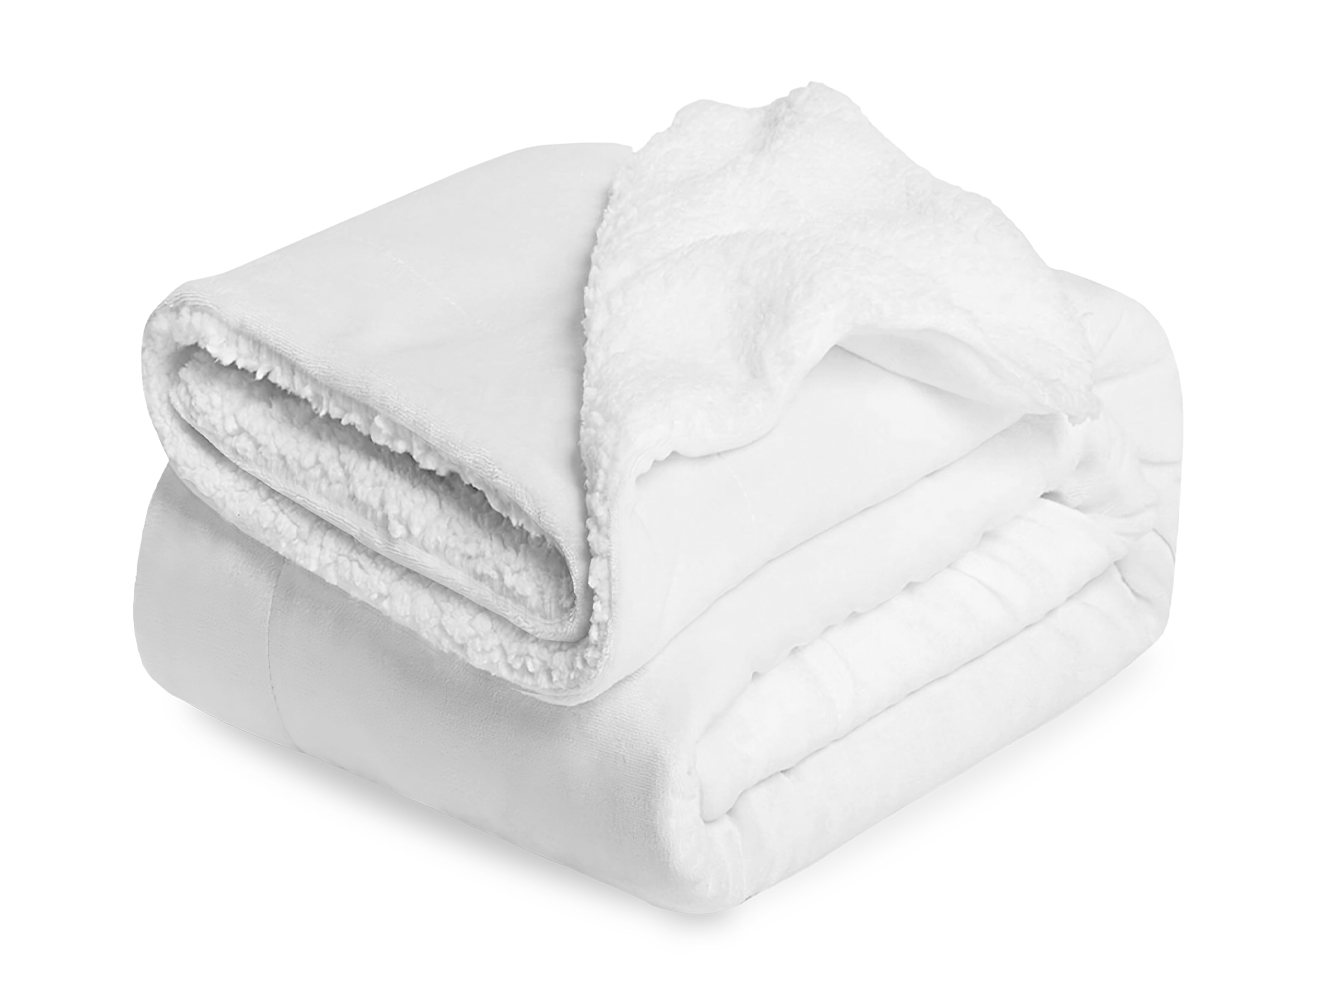 Sublimation Fleece Blanket with Sherpa Lining 127 x 152 cm - White